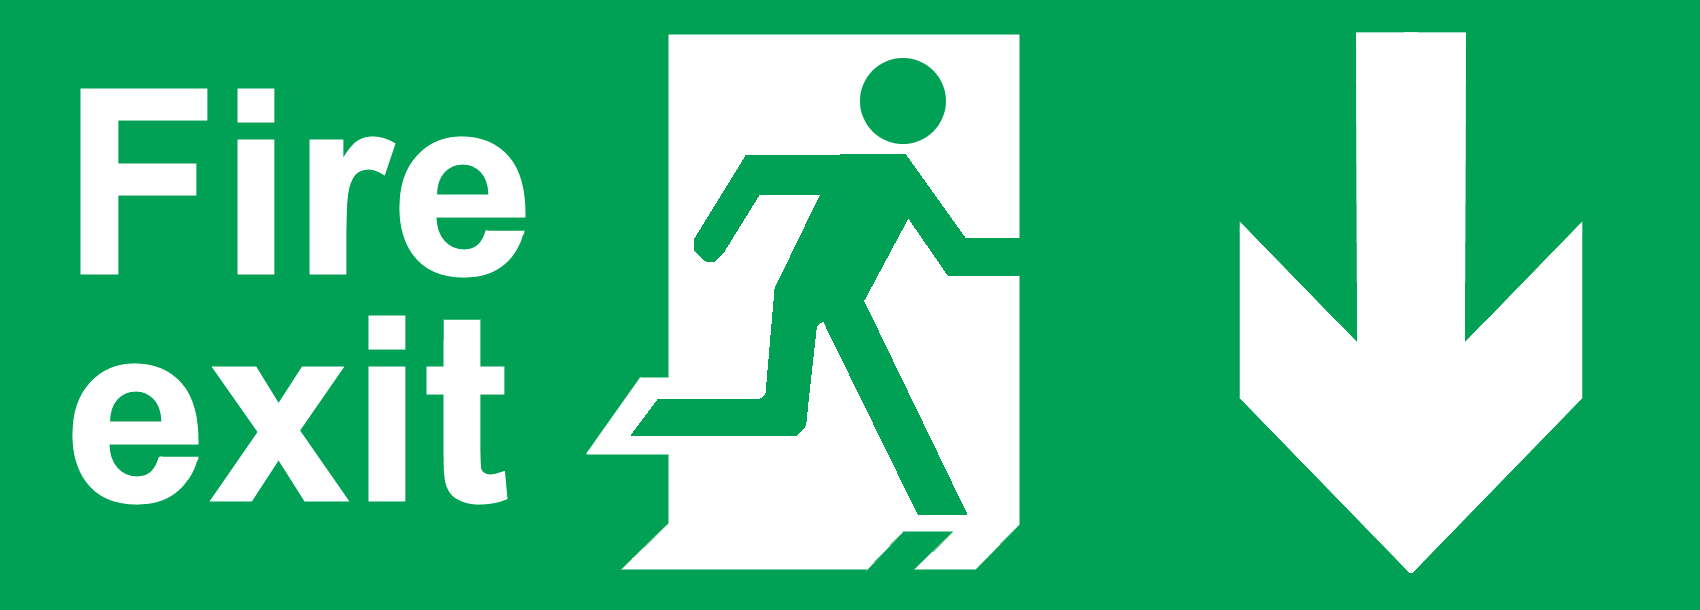 Emergency Exit Sign Vector - ClipArt Best